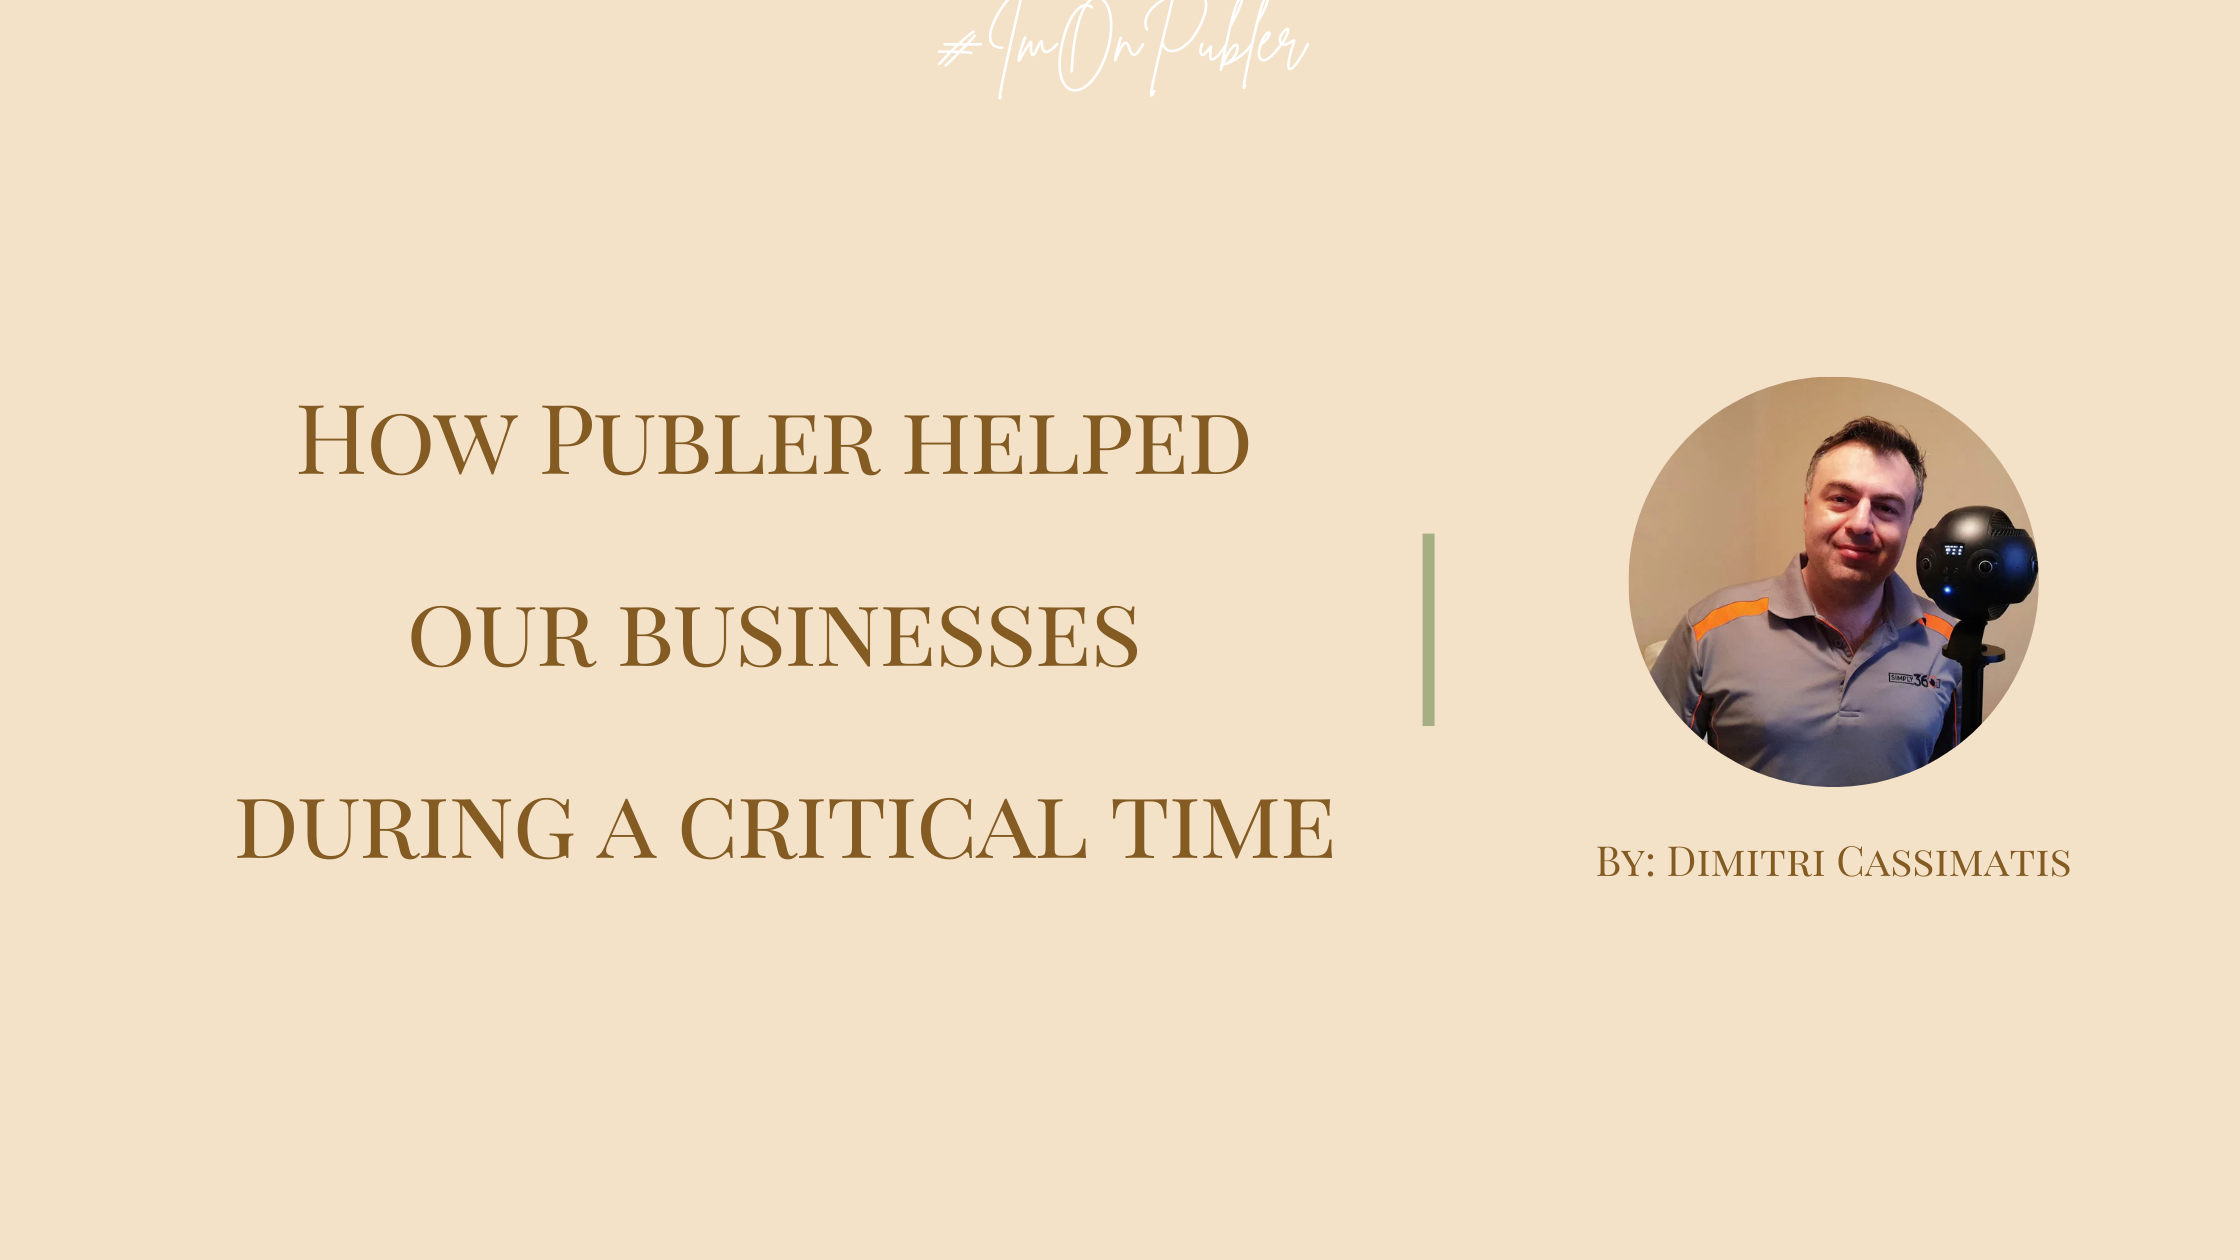 How Publer helped our businesses during a critical time by Dimitri Cassimatis